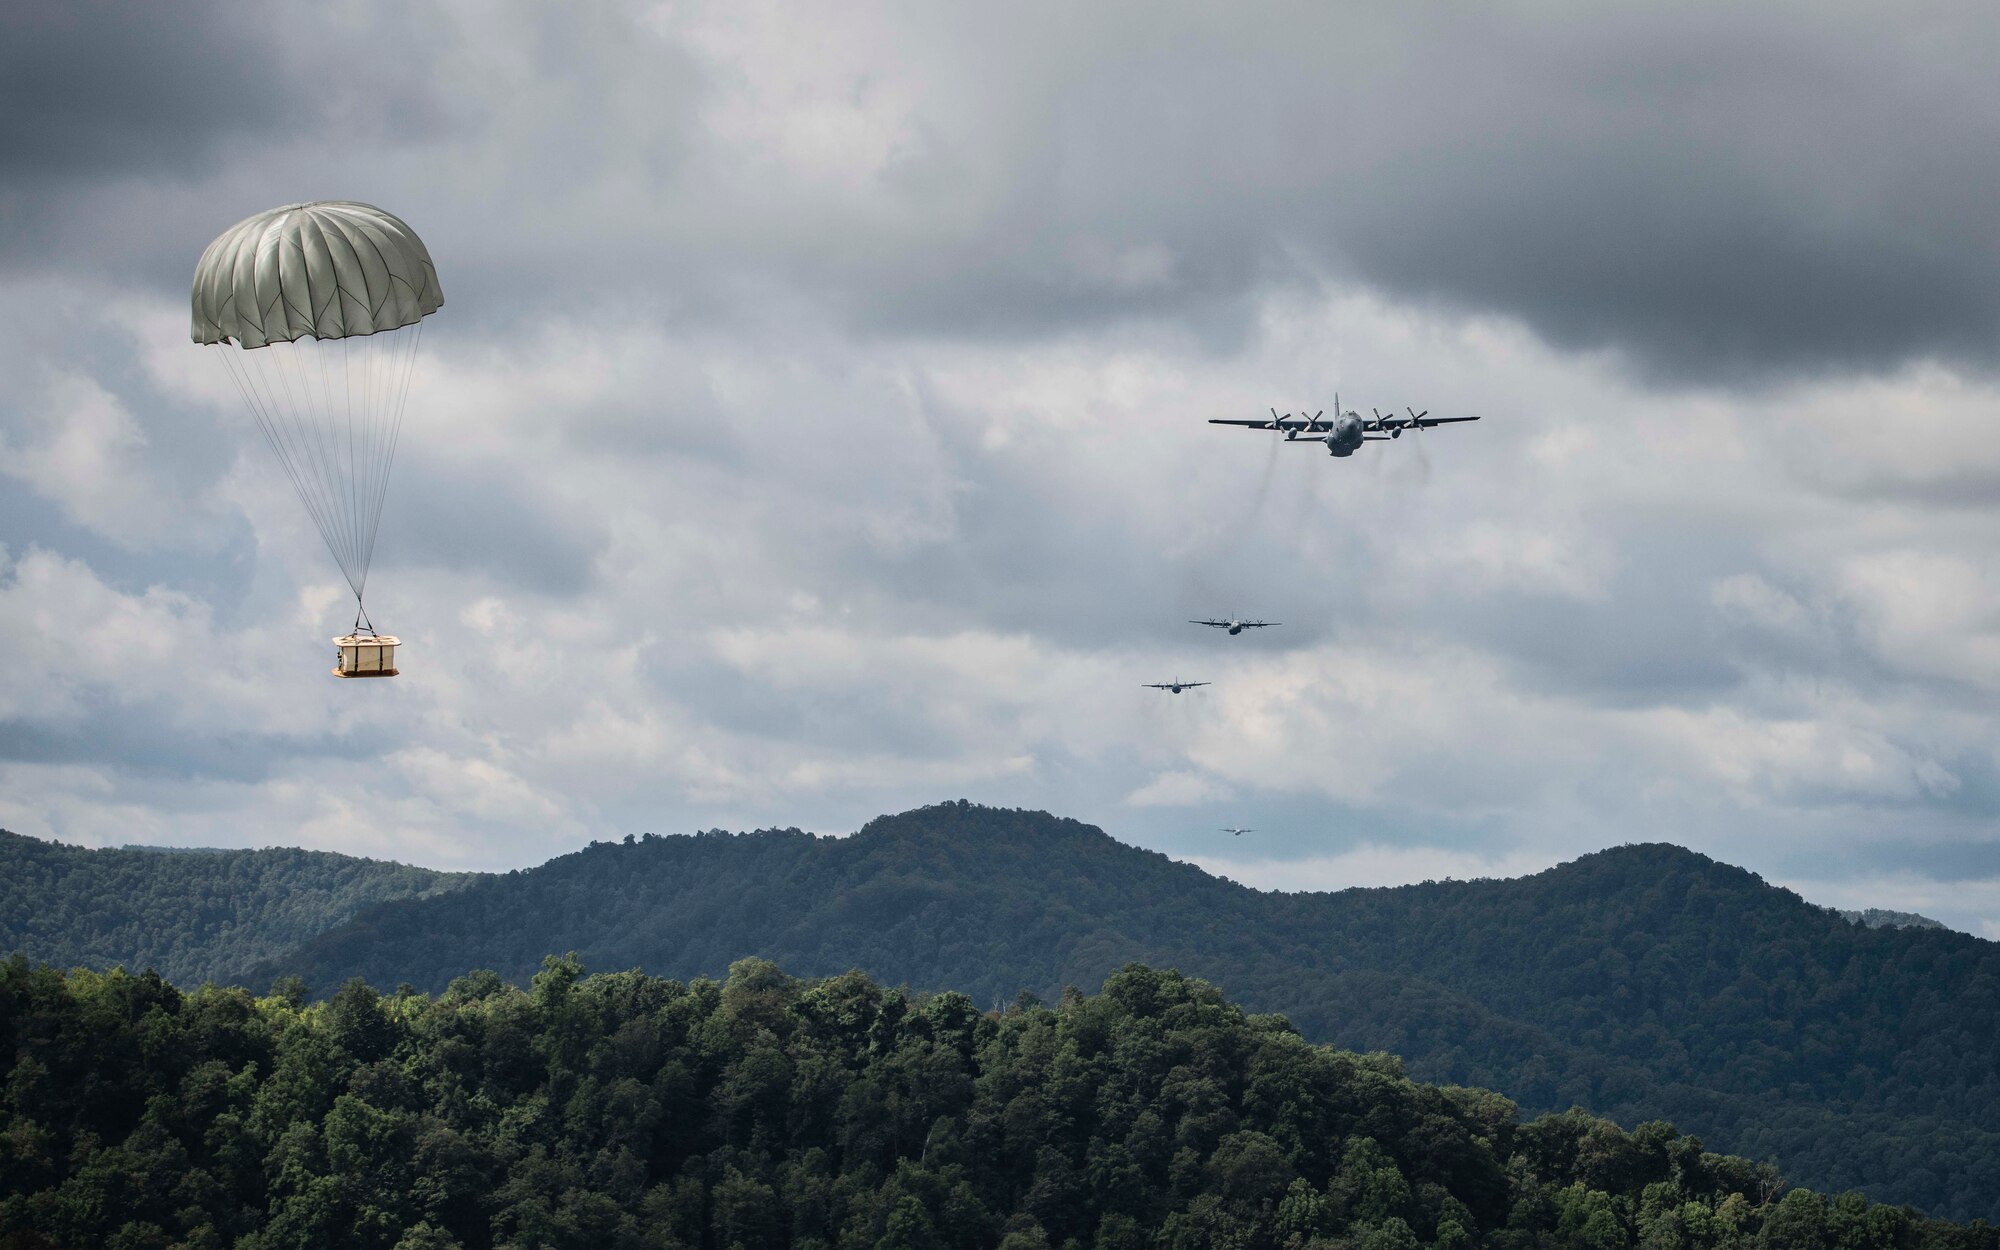 Cargo parachutes toward the drop zone as multiple C-130 aircraft perform an airdrop near Charleston, W. Va., Aug. 24, 2020. Eight C-130s from Reserve and Guard partners participate in a week-long training event. The scenario was designed to test the abilities of Air Force Reserve units to execute rapid global mobility missions in challenging, contested scenarios. (U.S. Air Force Reserve photo by Senior Airman Nathan Byrnes)